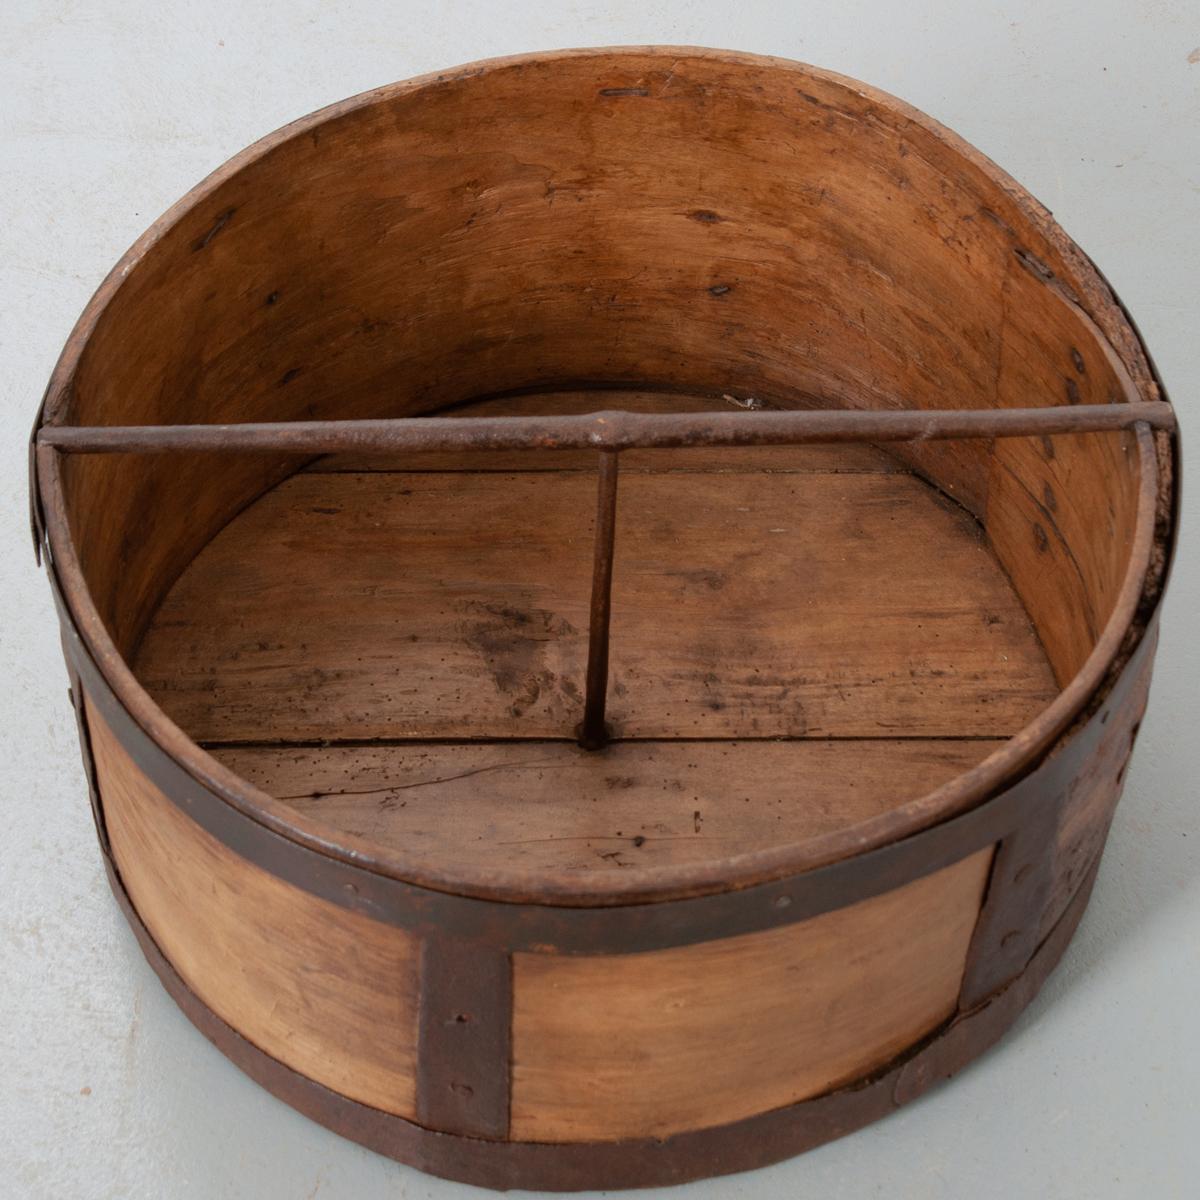 This dry grain measure is a large, handsome culinary antique. Beautifully aged wood with patinated hand forged iron banding provides this piece with deep character.
   